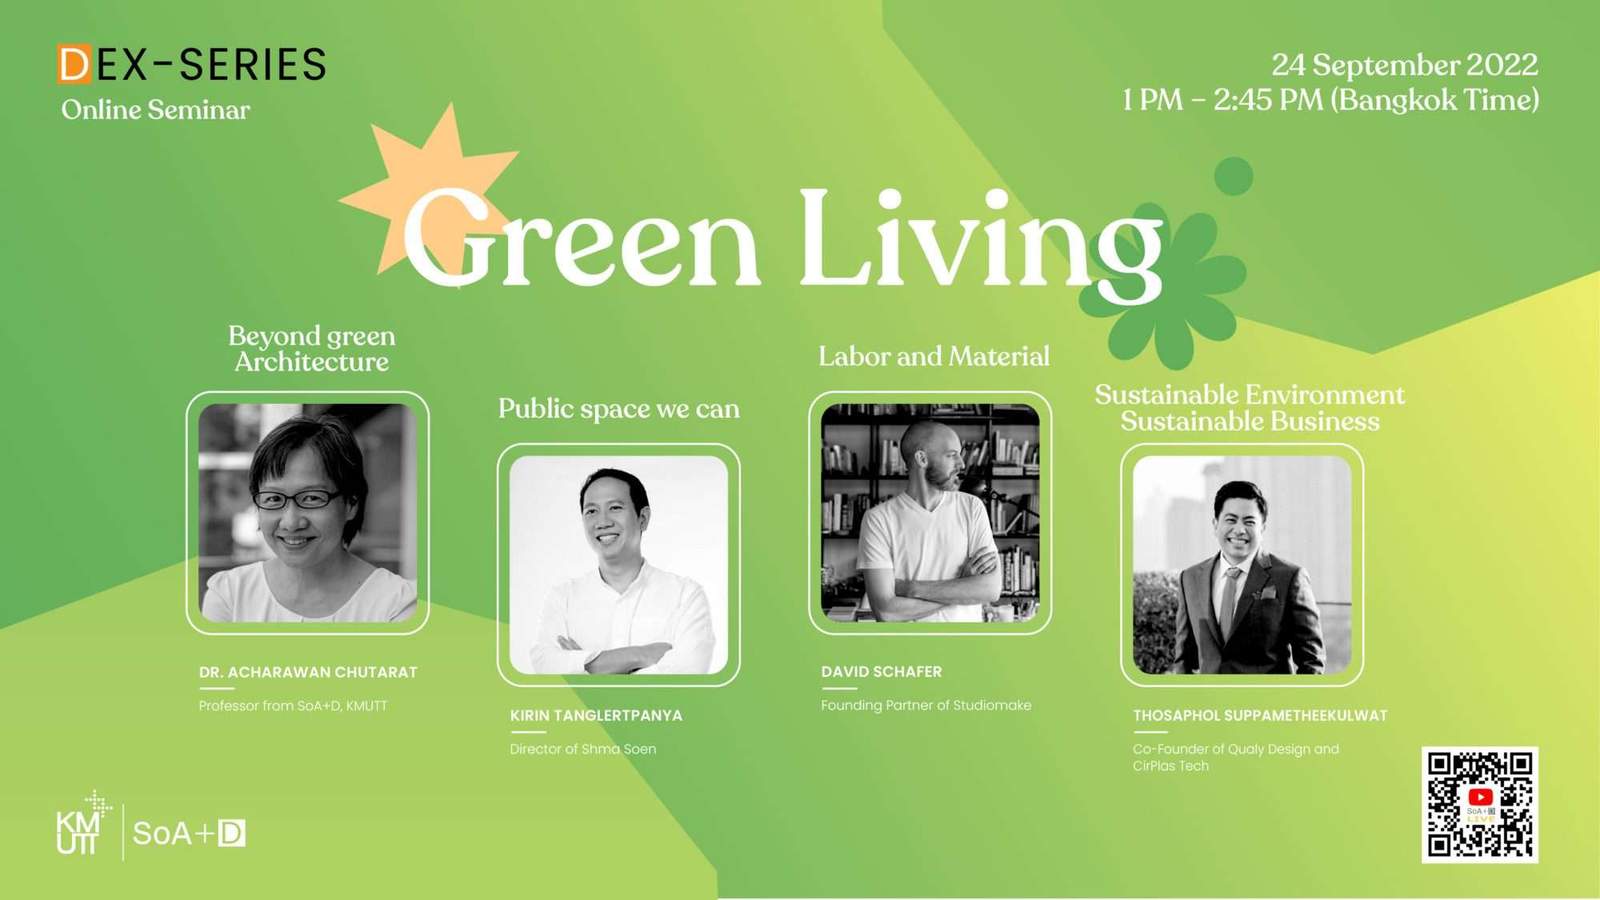 Online Lecture “Green Living by SoA+D”